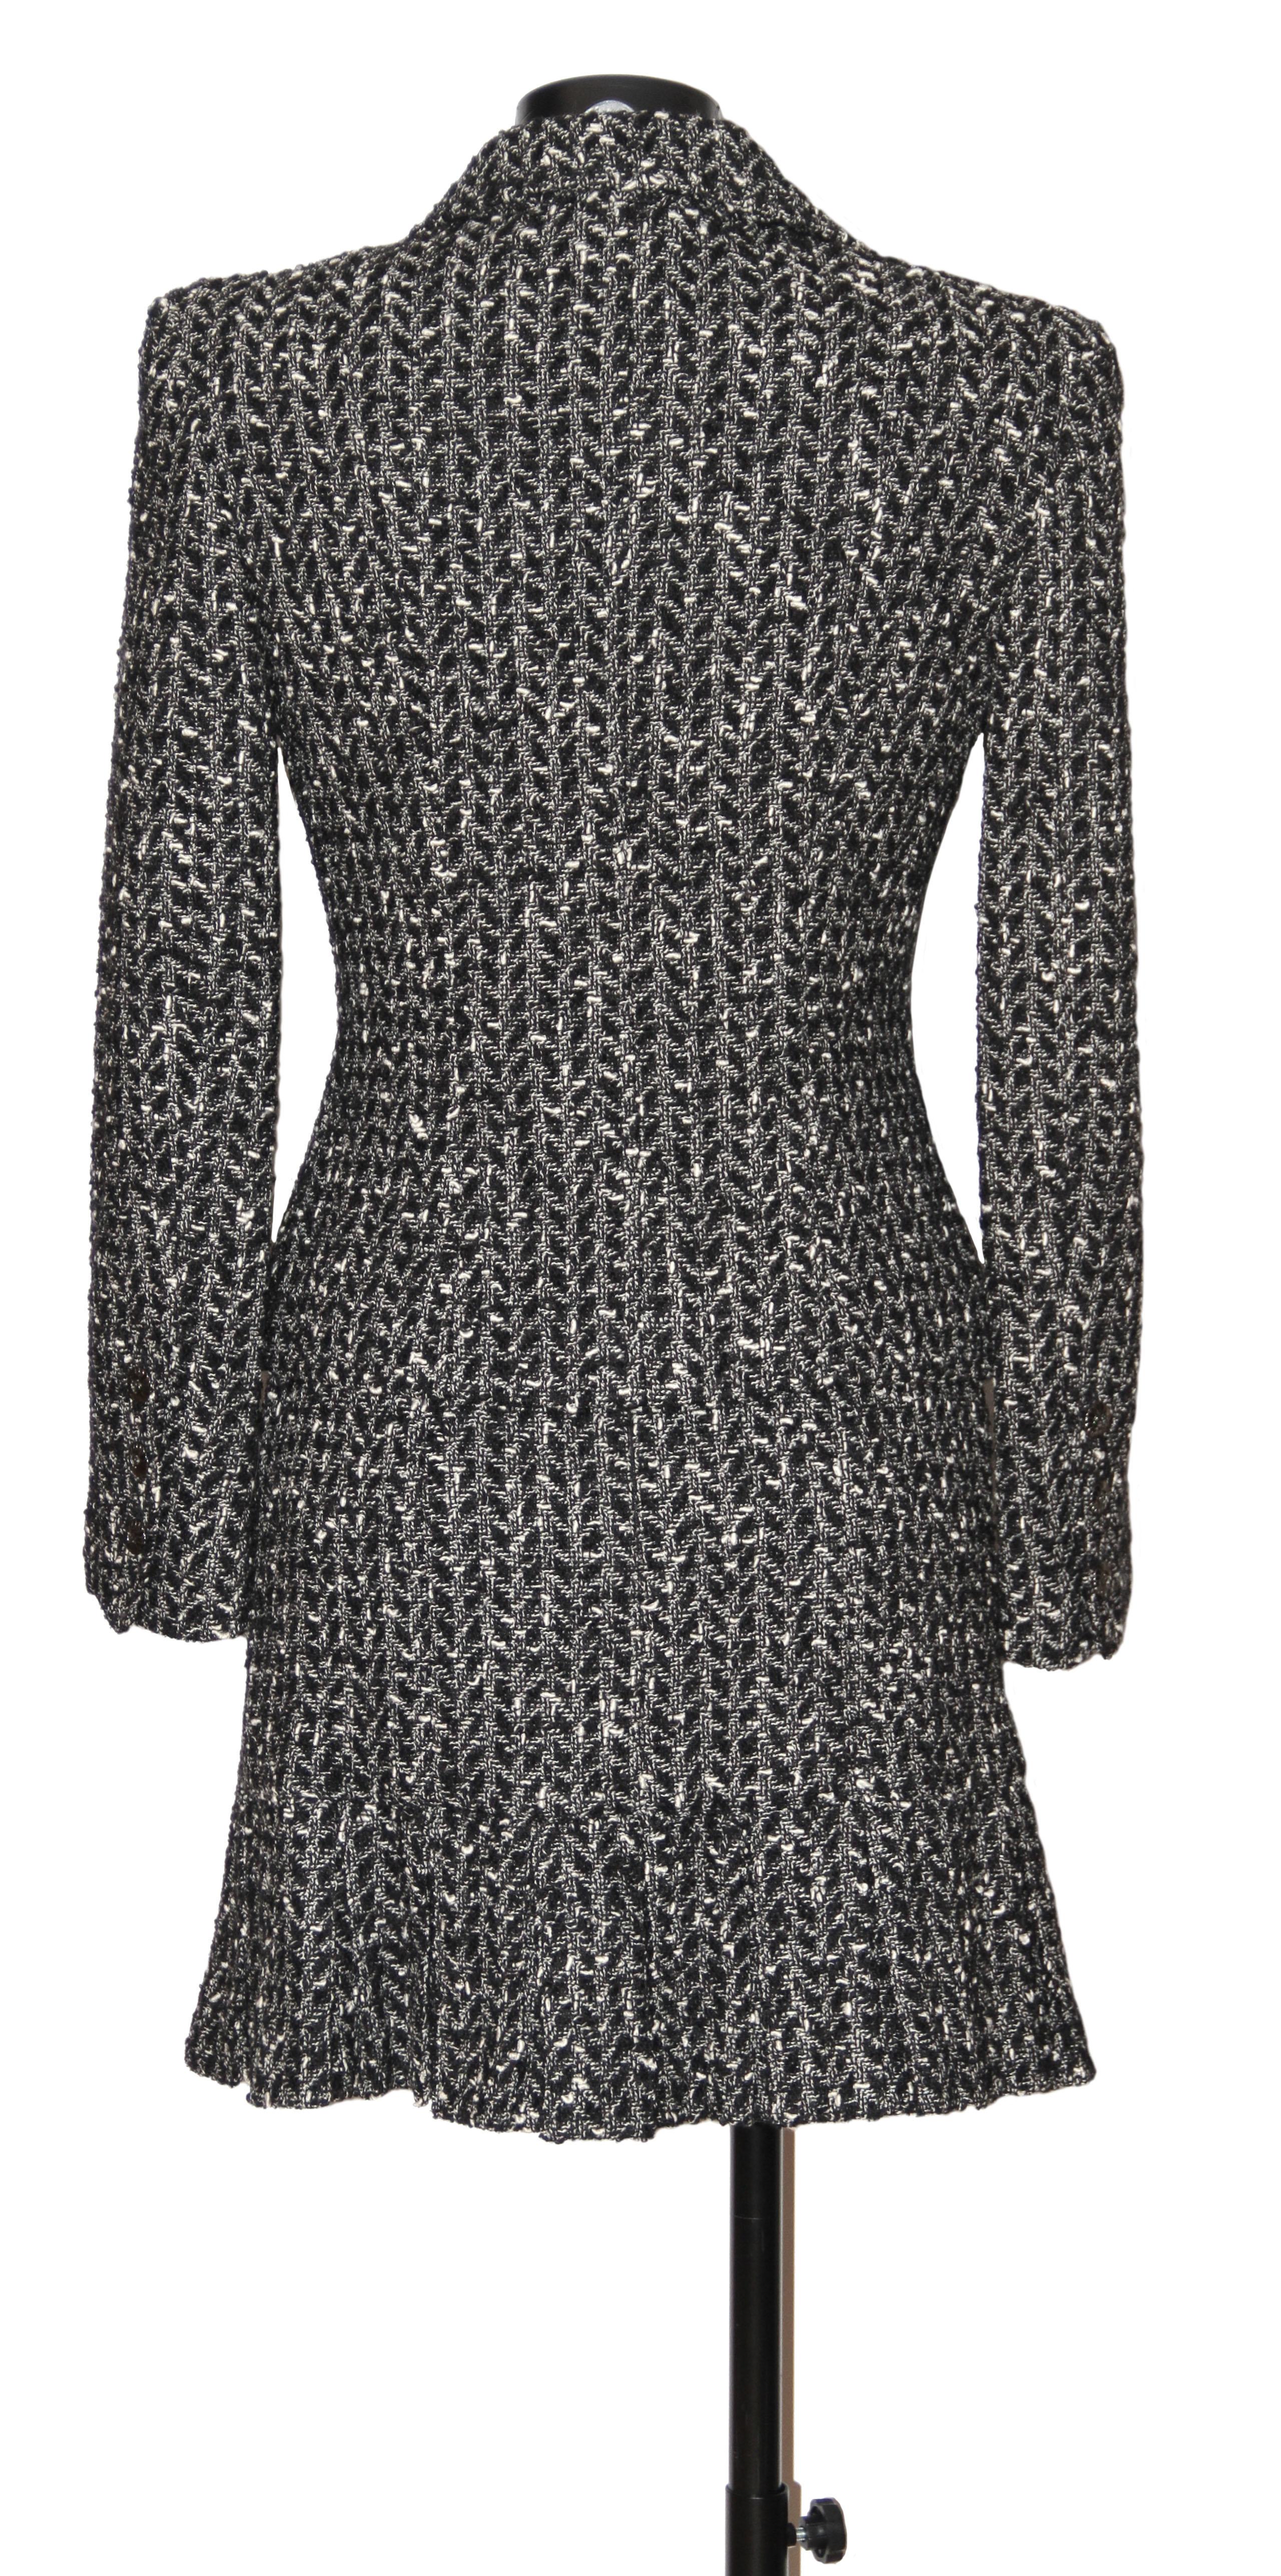 In excellent condition, this pre-owned Chanel suit is crafted in the classic black and white wool tweed. 
The jacket is single breasted finished with 4 gunmnetal CC buttons and 2 flat pockets. The sleeves have 3x small matching buttons.
The skirt